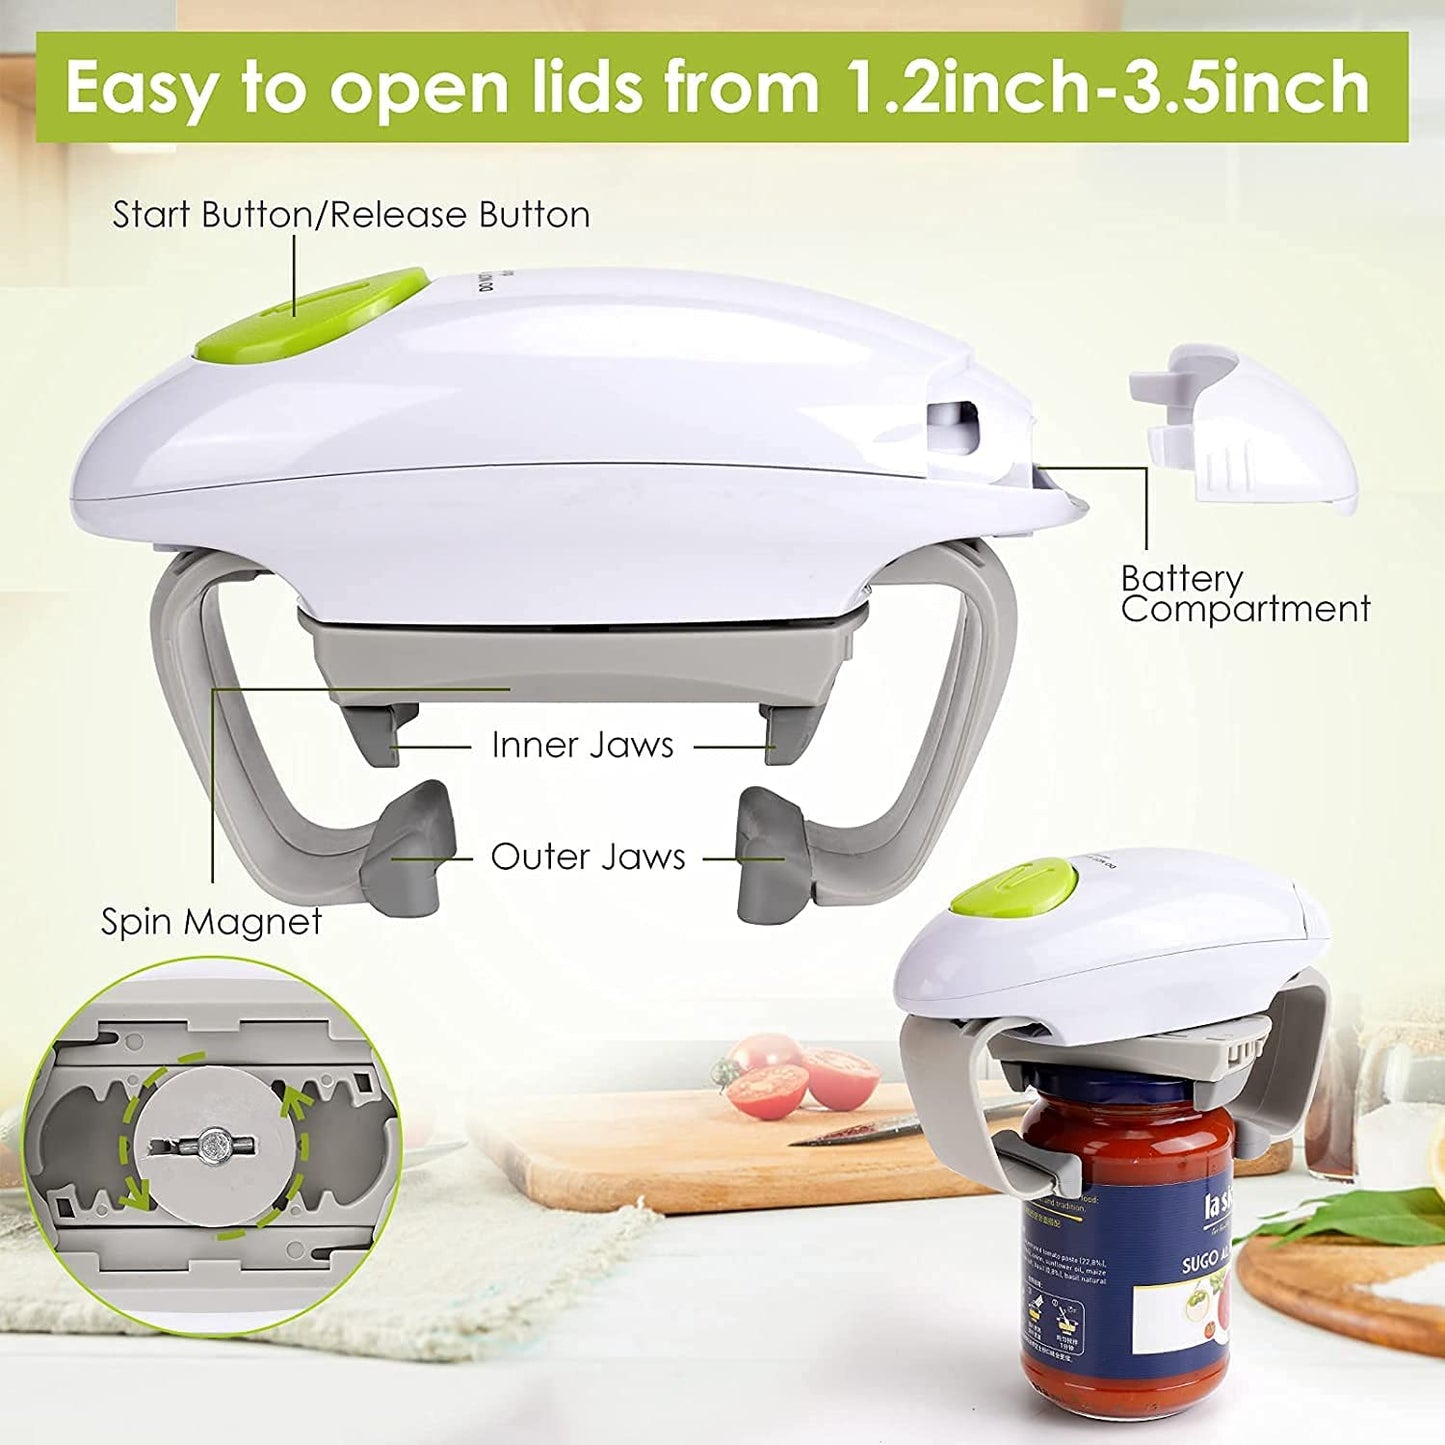 Electric Jar Opener, Kitchen Gadget Strong Tough Automatic Jar Opener for New Sealed Jars,The Hands Free Jar Opener with Less Effort to Open (White)